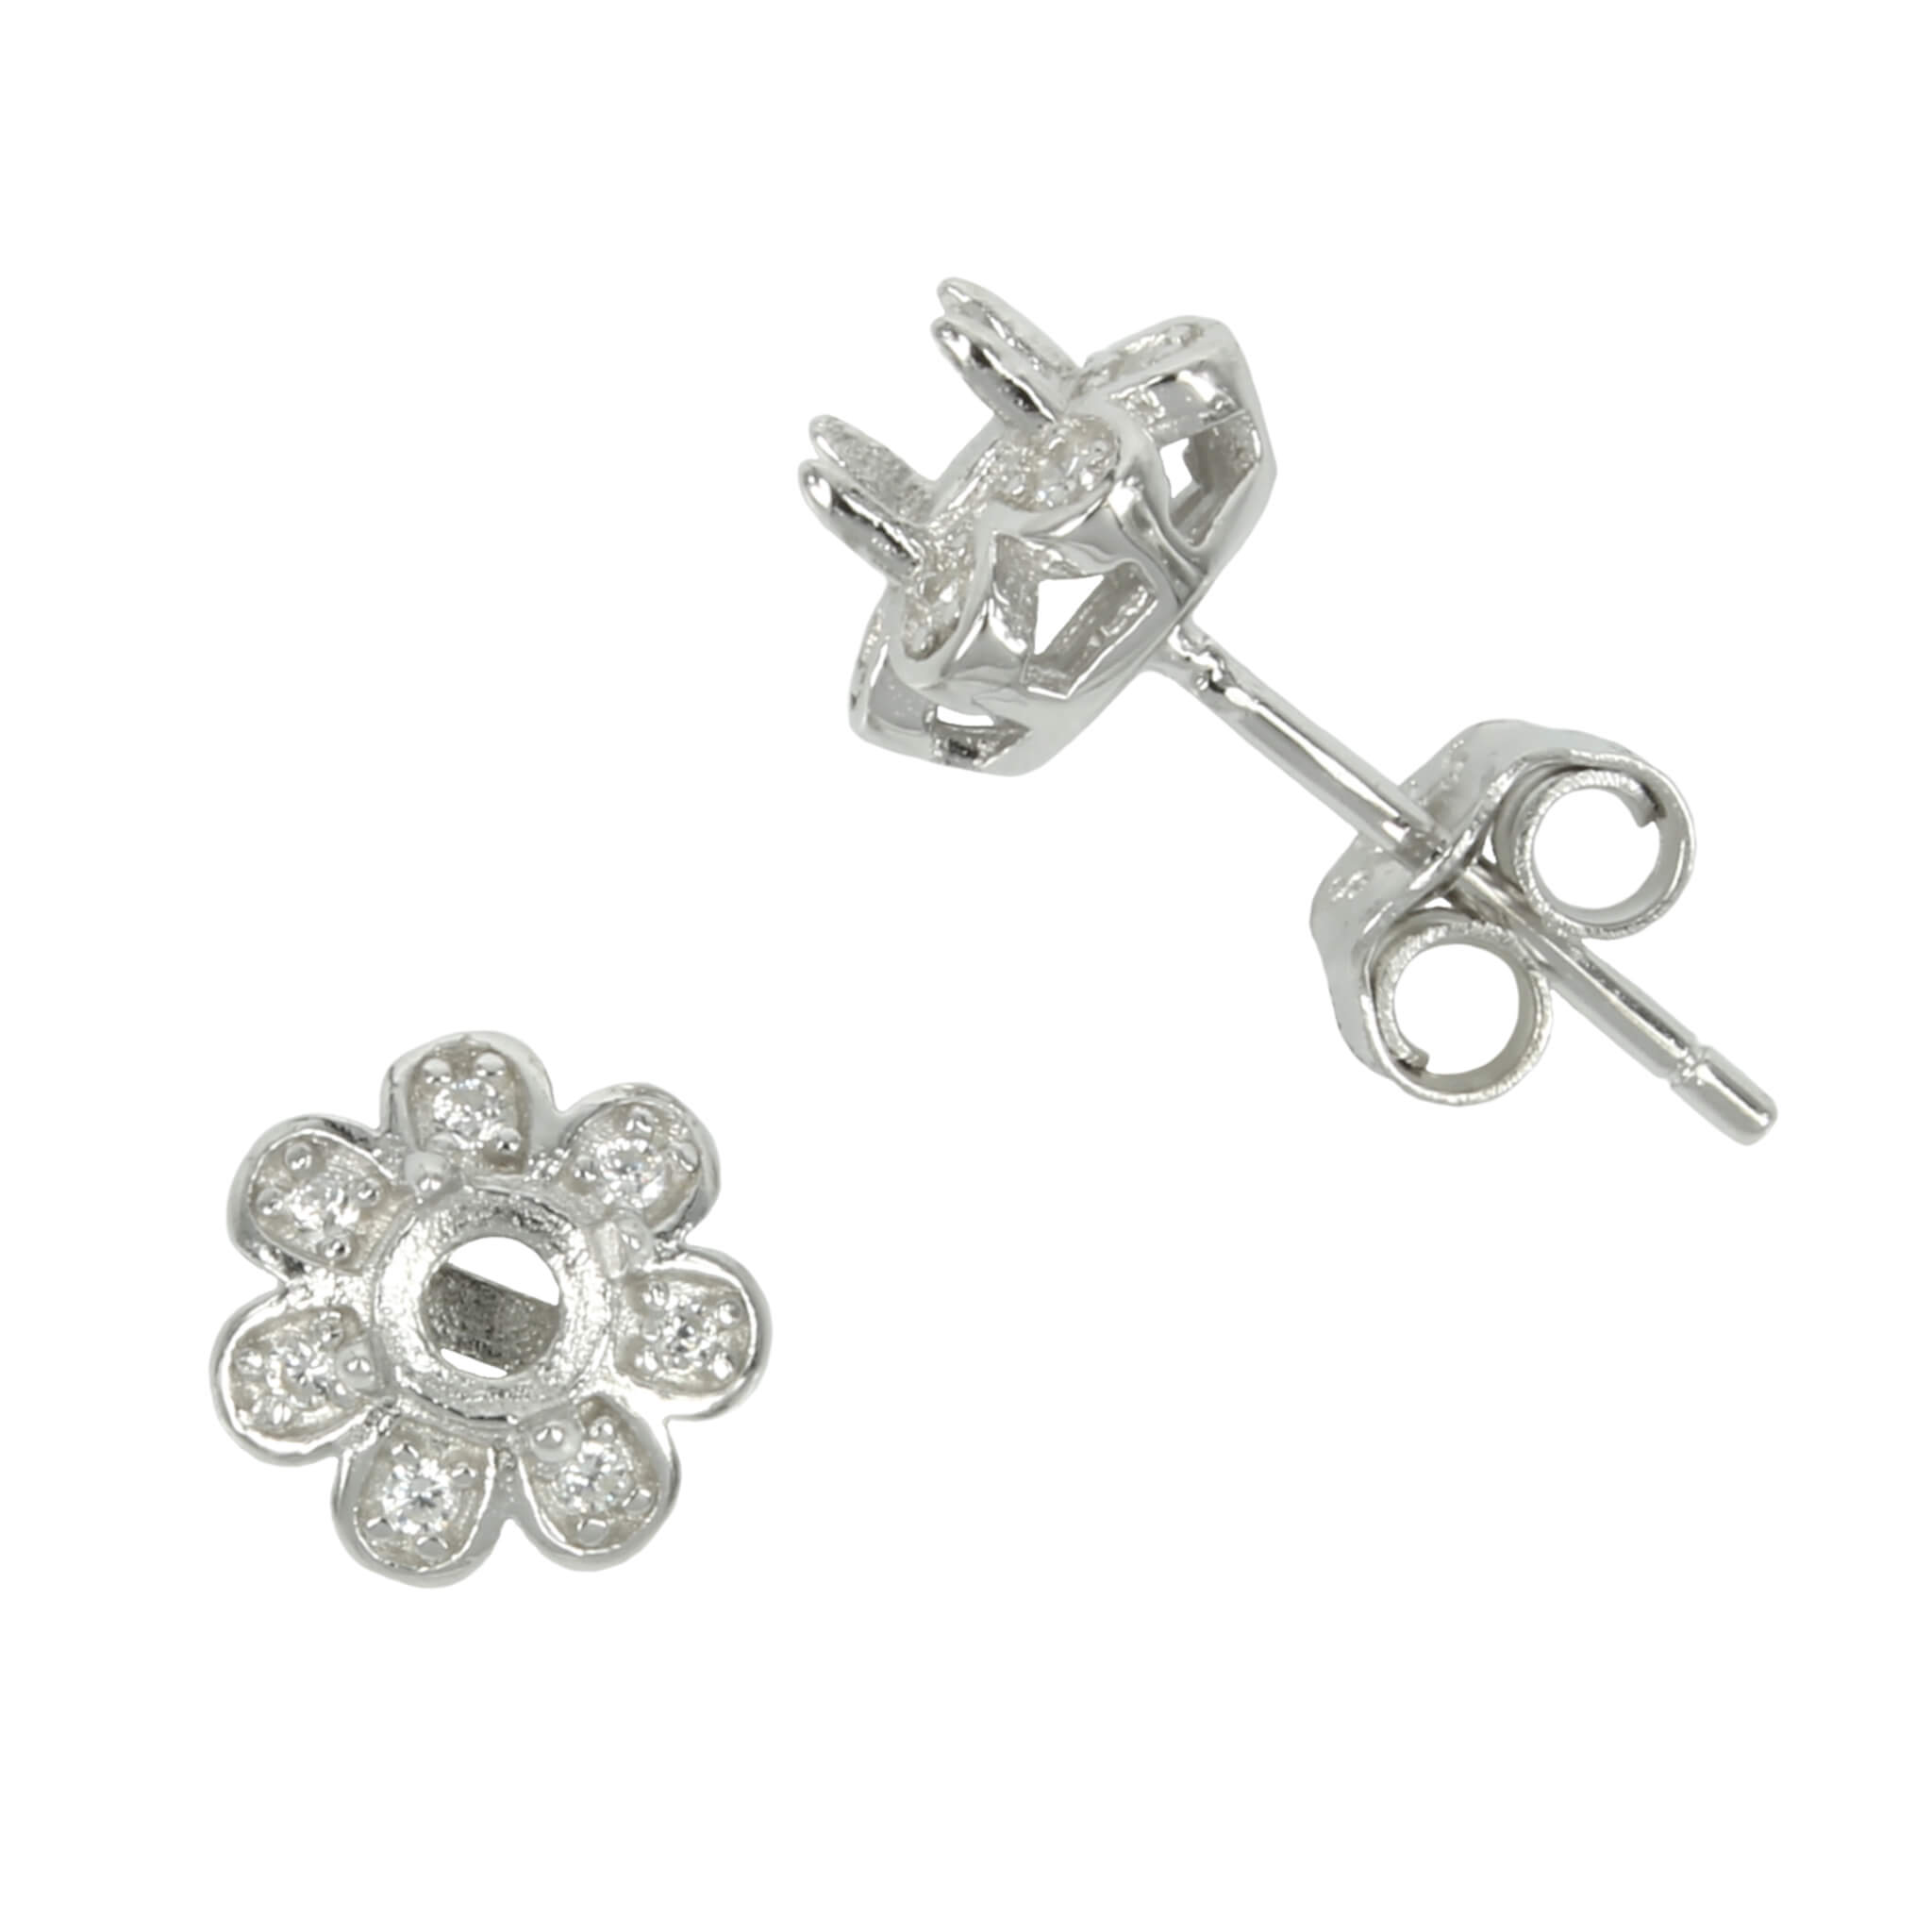 CZ Daisy Stud Earrings with Round Prong Mounting in Sterling Silver for 3mm Stones